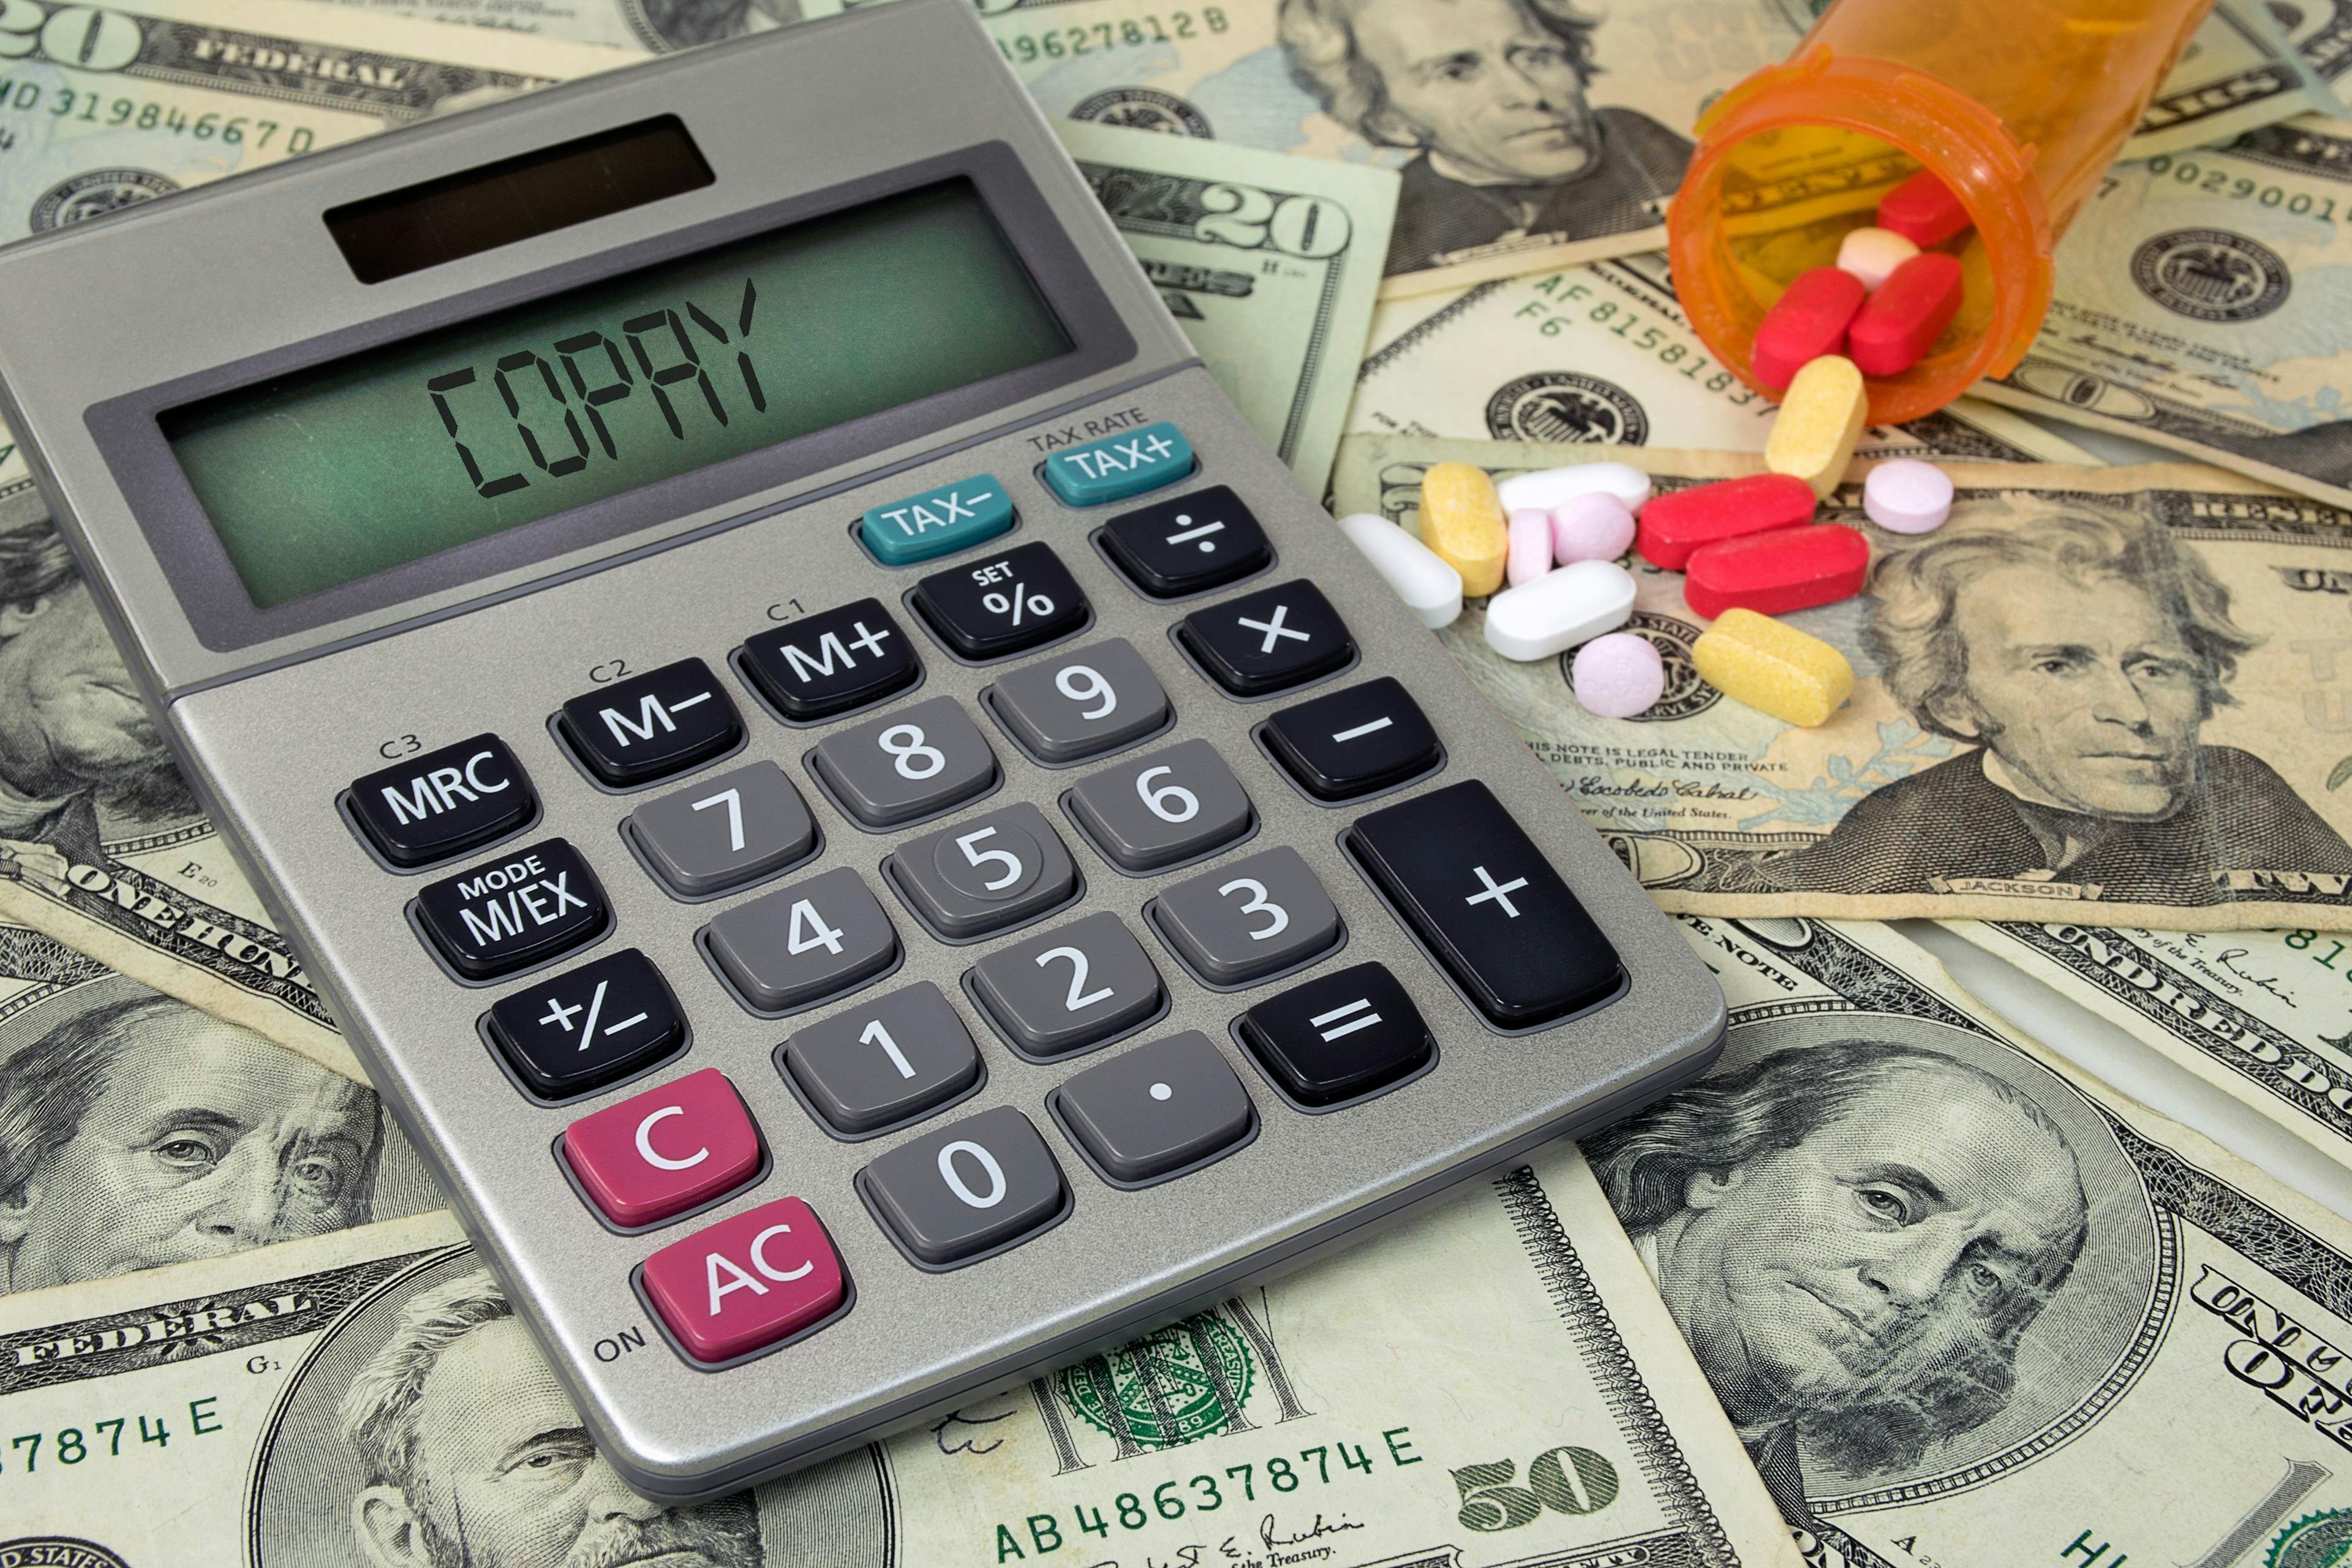 Image credit: driftwood | stock.adobe.com. copay text on calculator with money and prescription pills in bottle